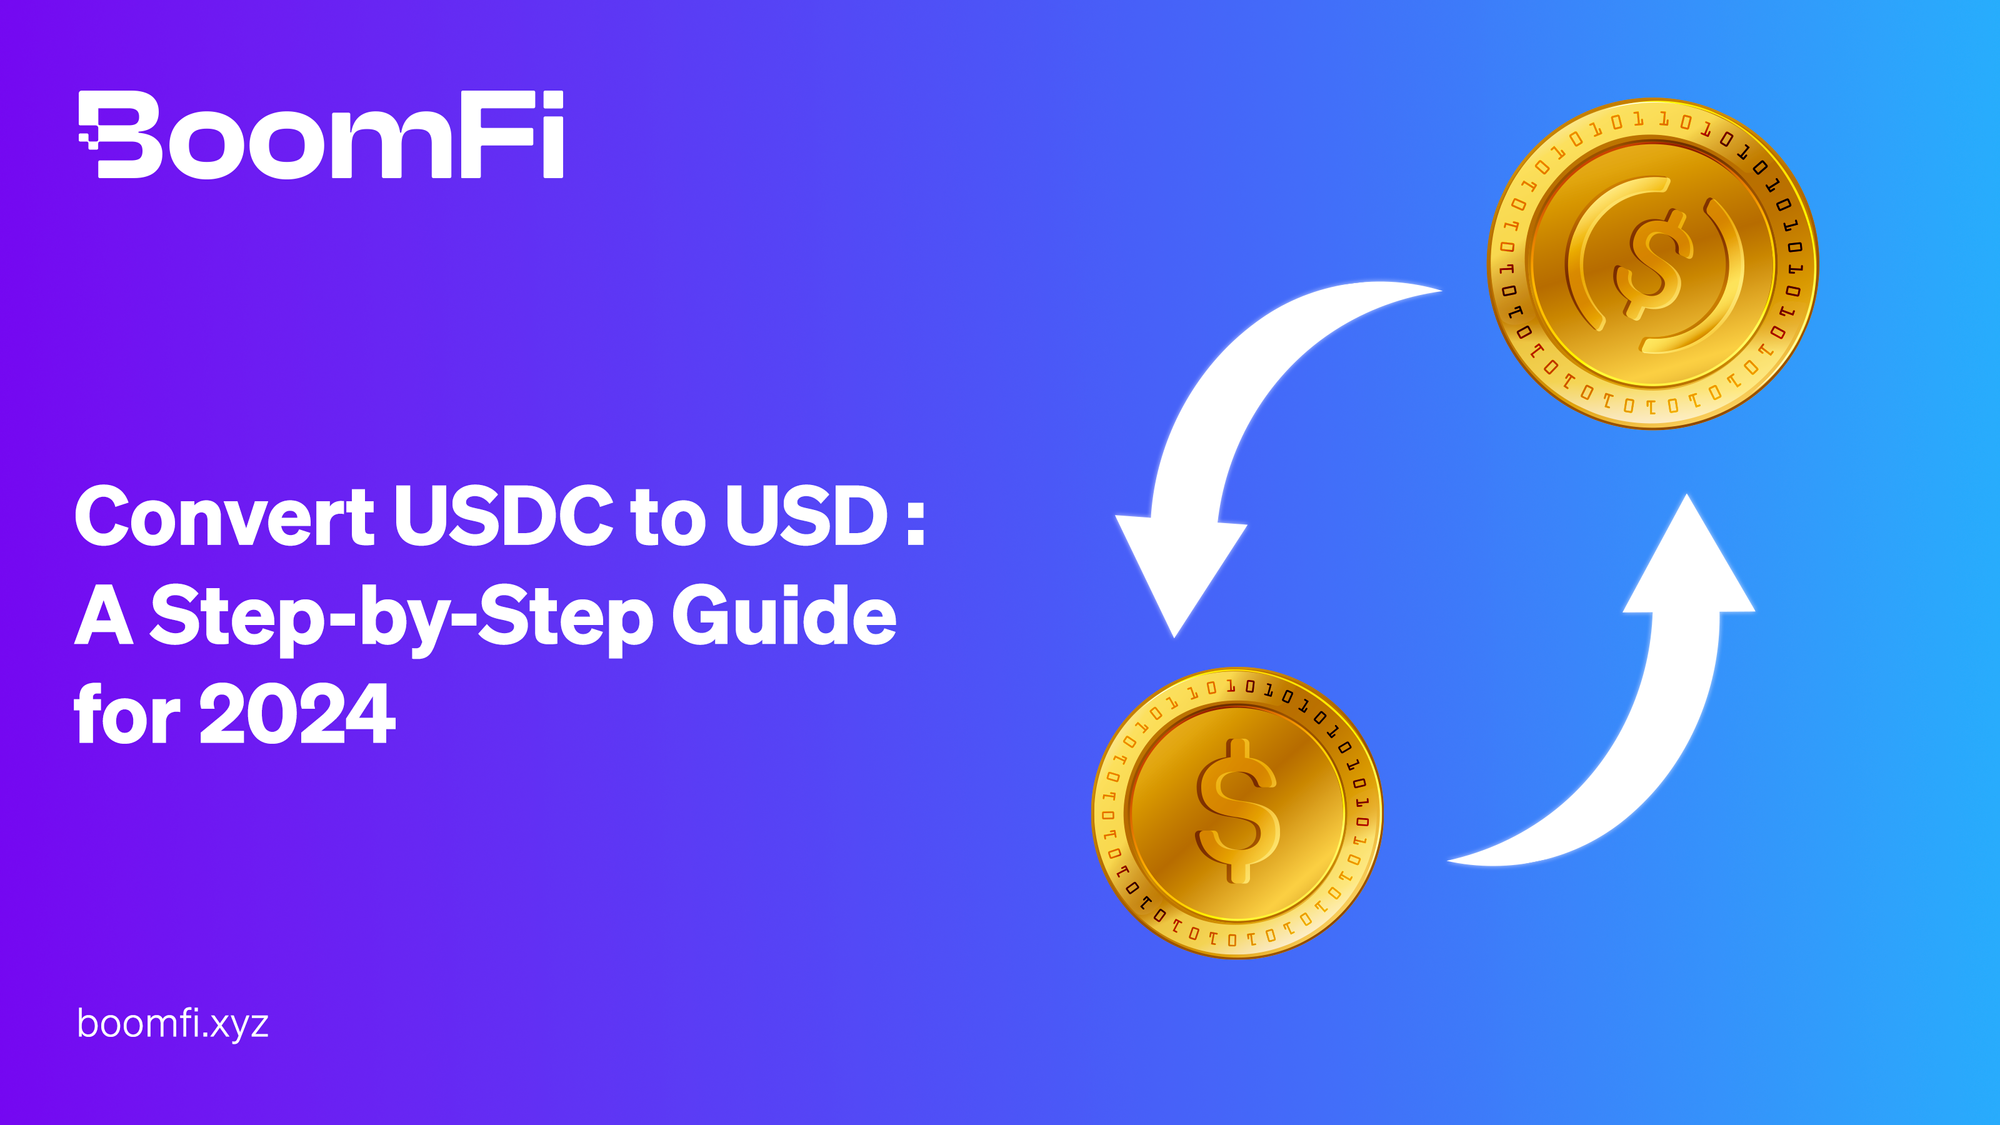 Convert USDC to USD: A Step-by-Step Guide for 2024